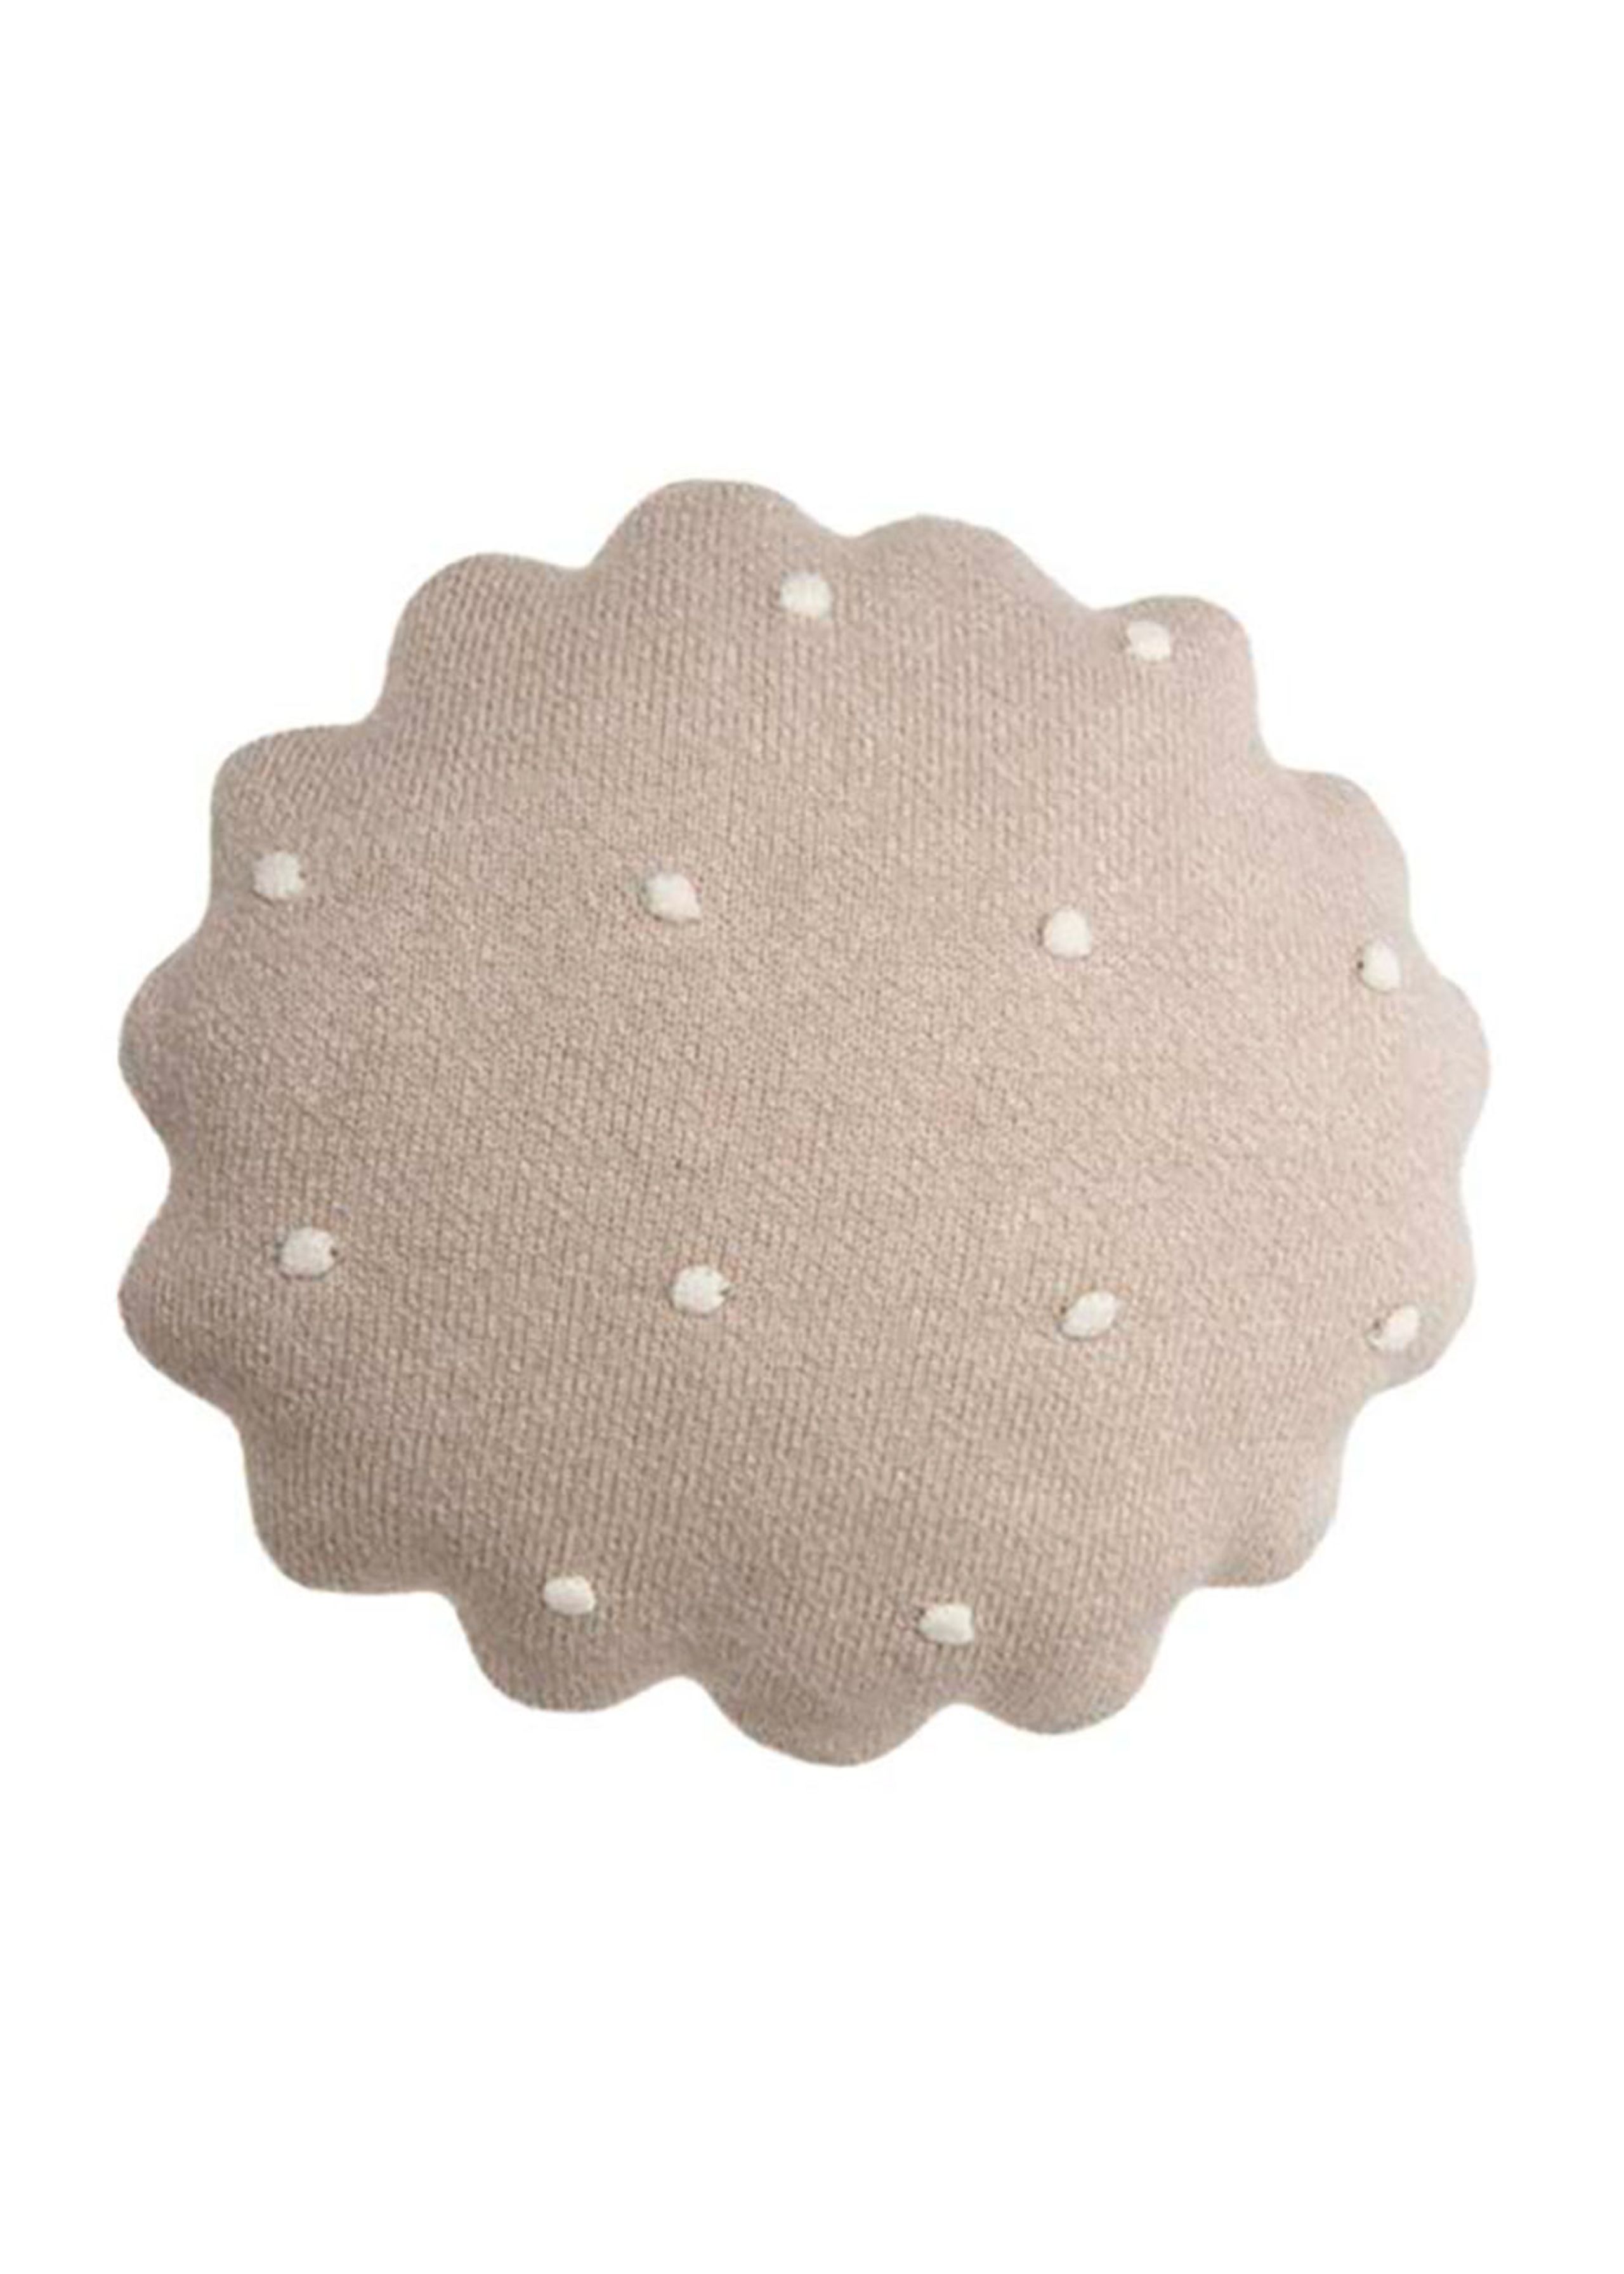 Lorena Canals - Børnepude - Knitted Cushion Round Biscuit - Dune White